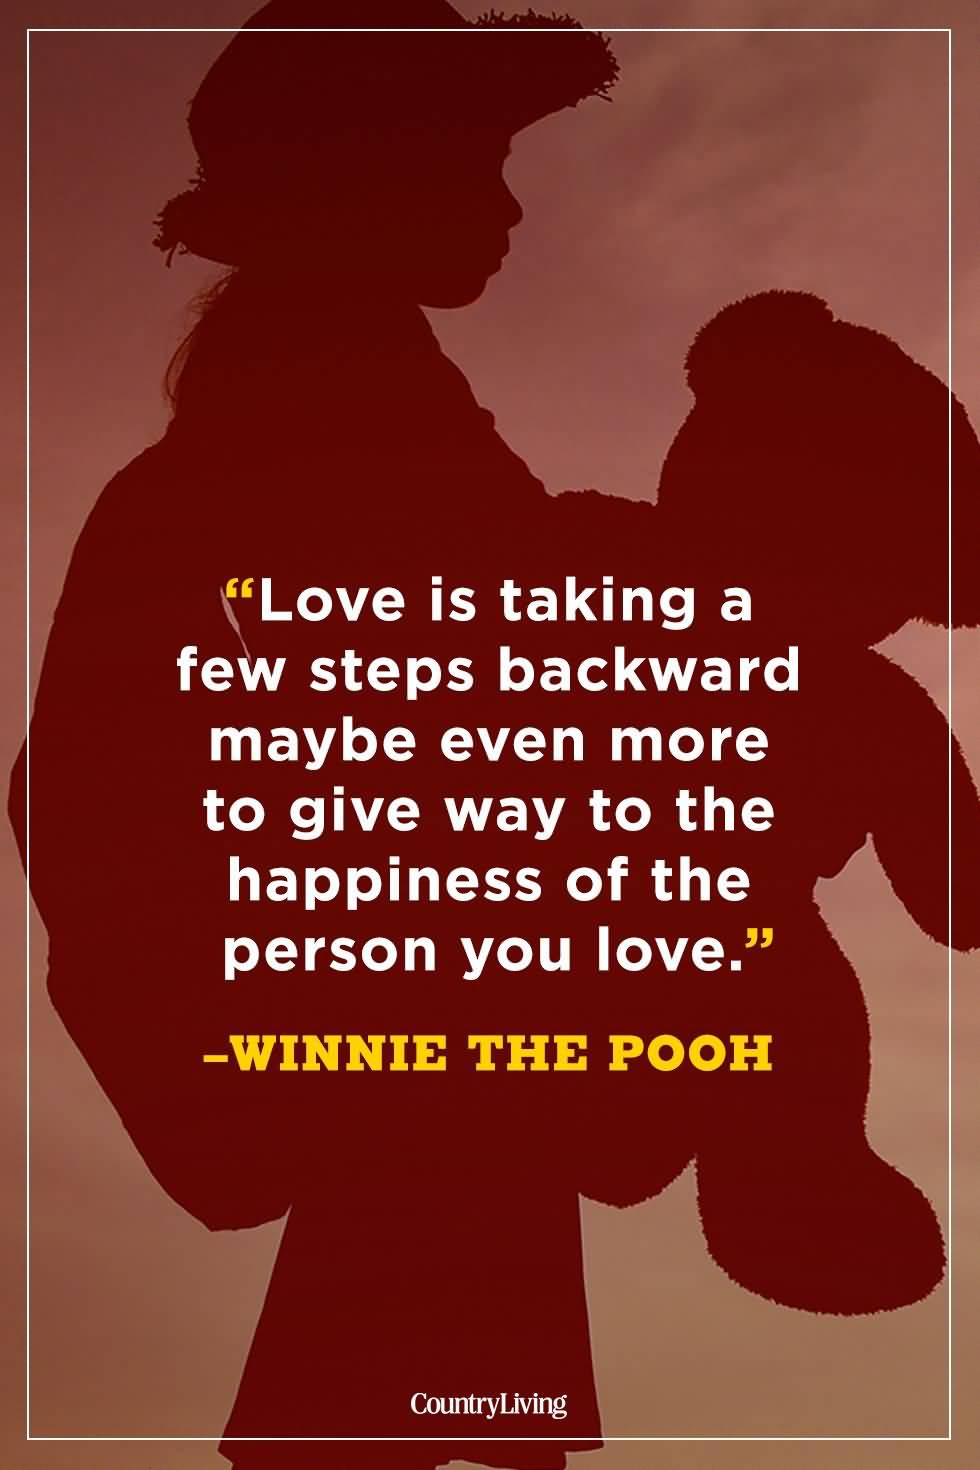 35 Priceless Winnie The Pooh Quotes You Must Read - Preet Kamal